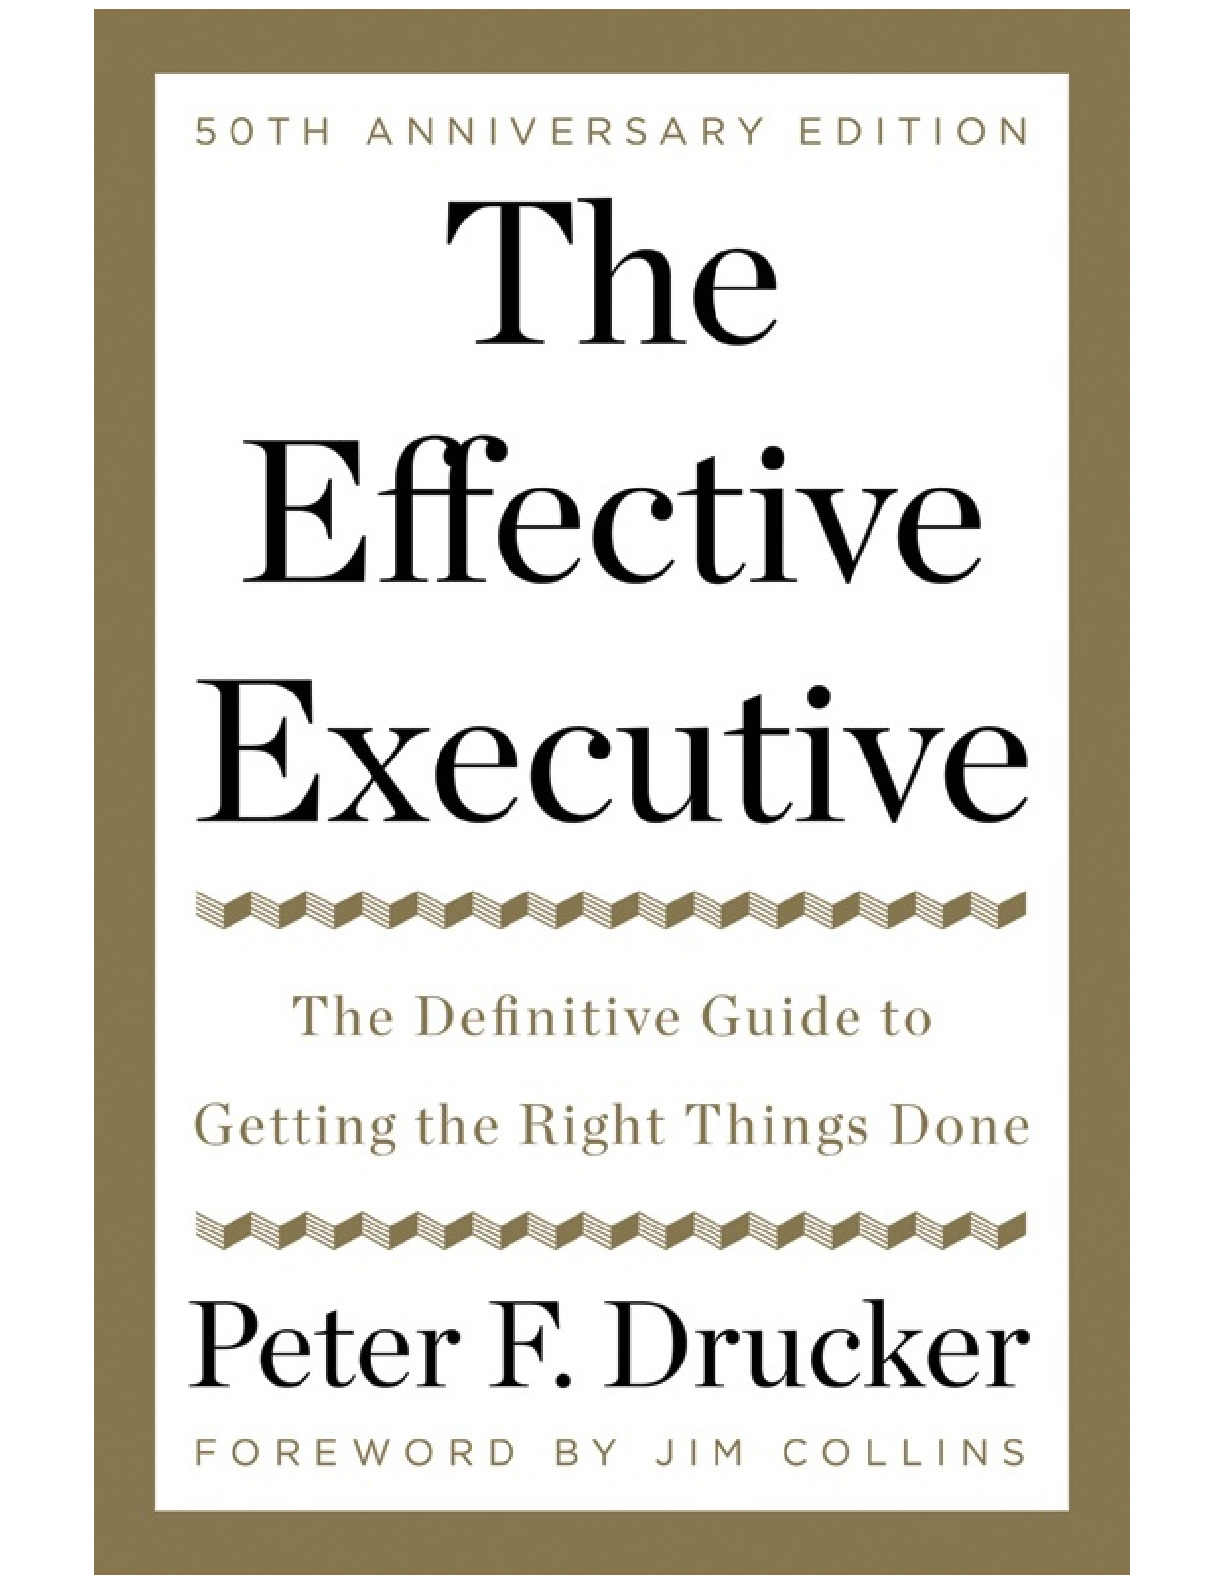 The Definitive Guide to Getting the Right Things Done